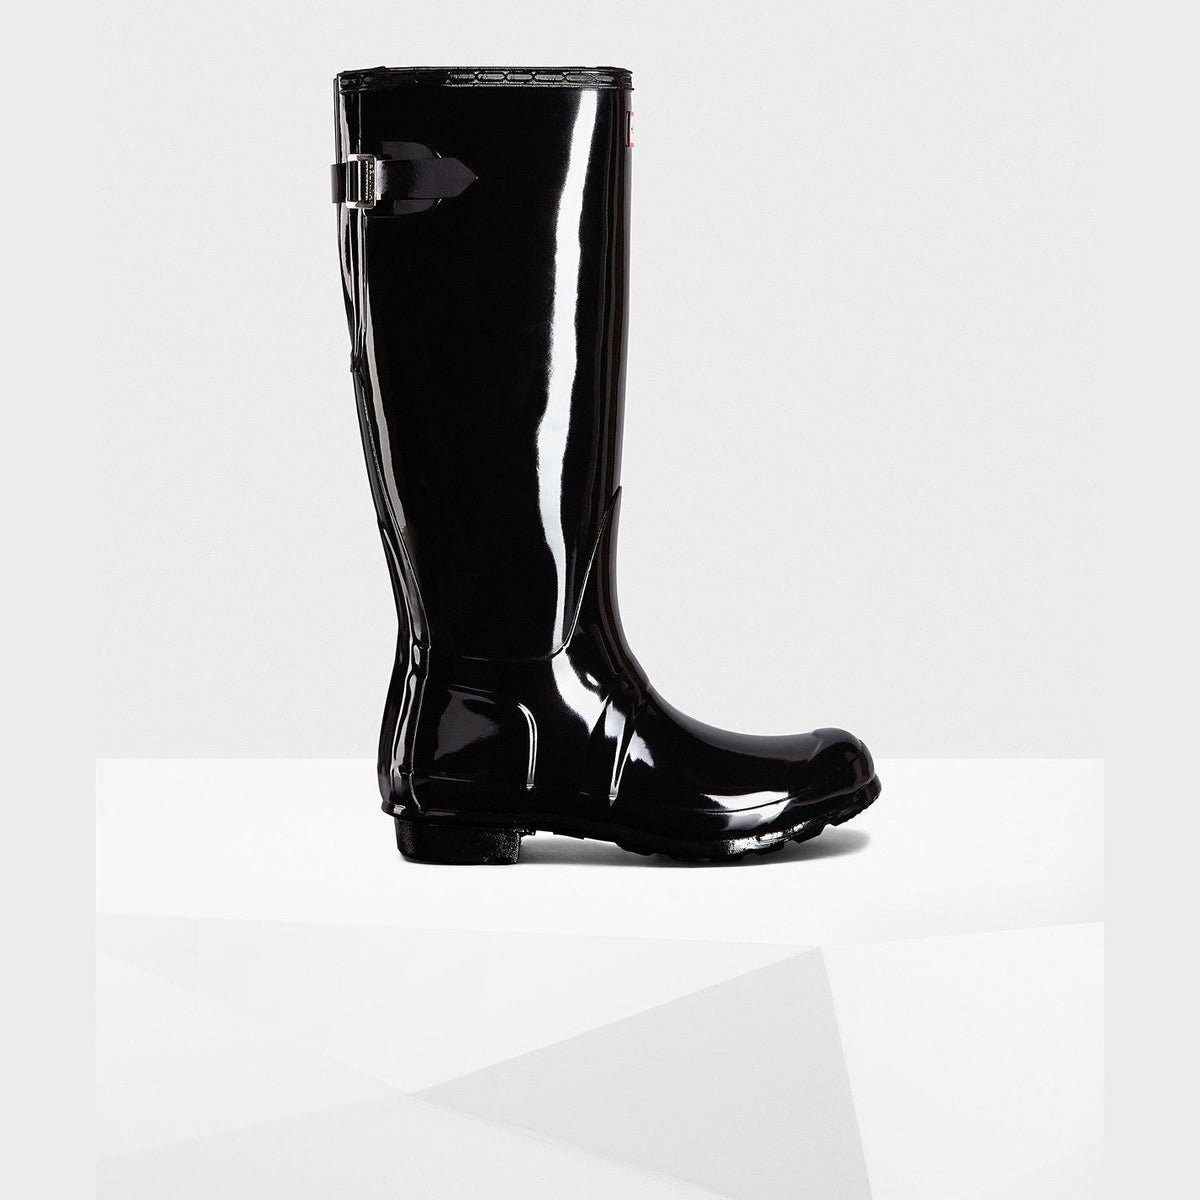 Hunter Boots Original Tall Back Adjustable Black Gloss Wellington - S.O.S Save Our Soles